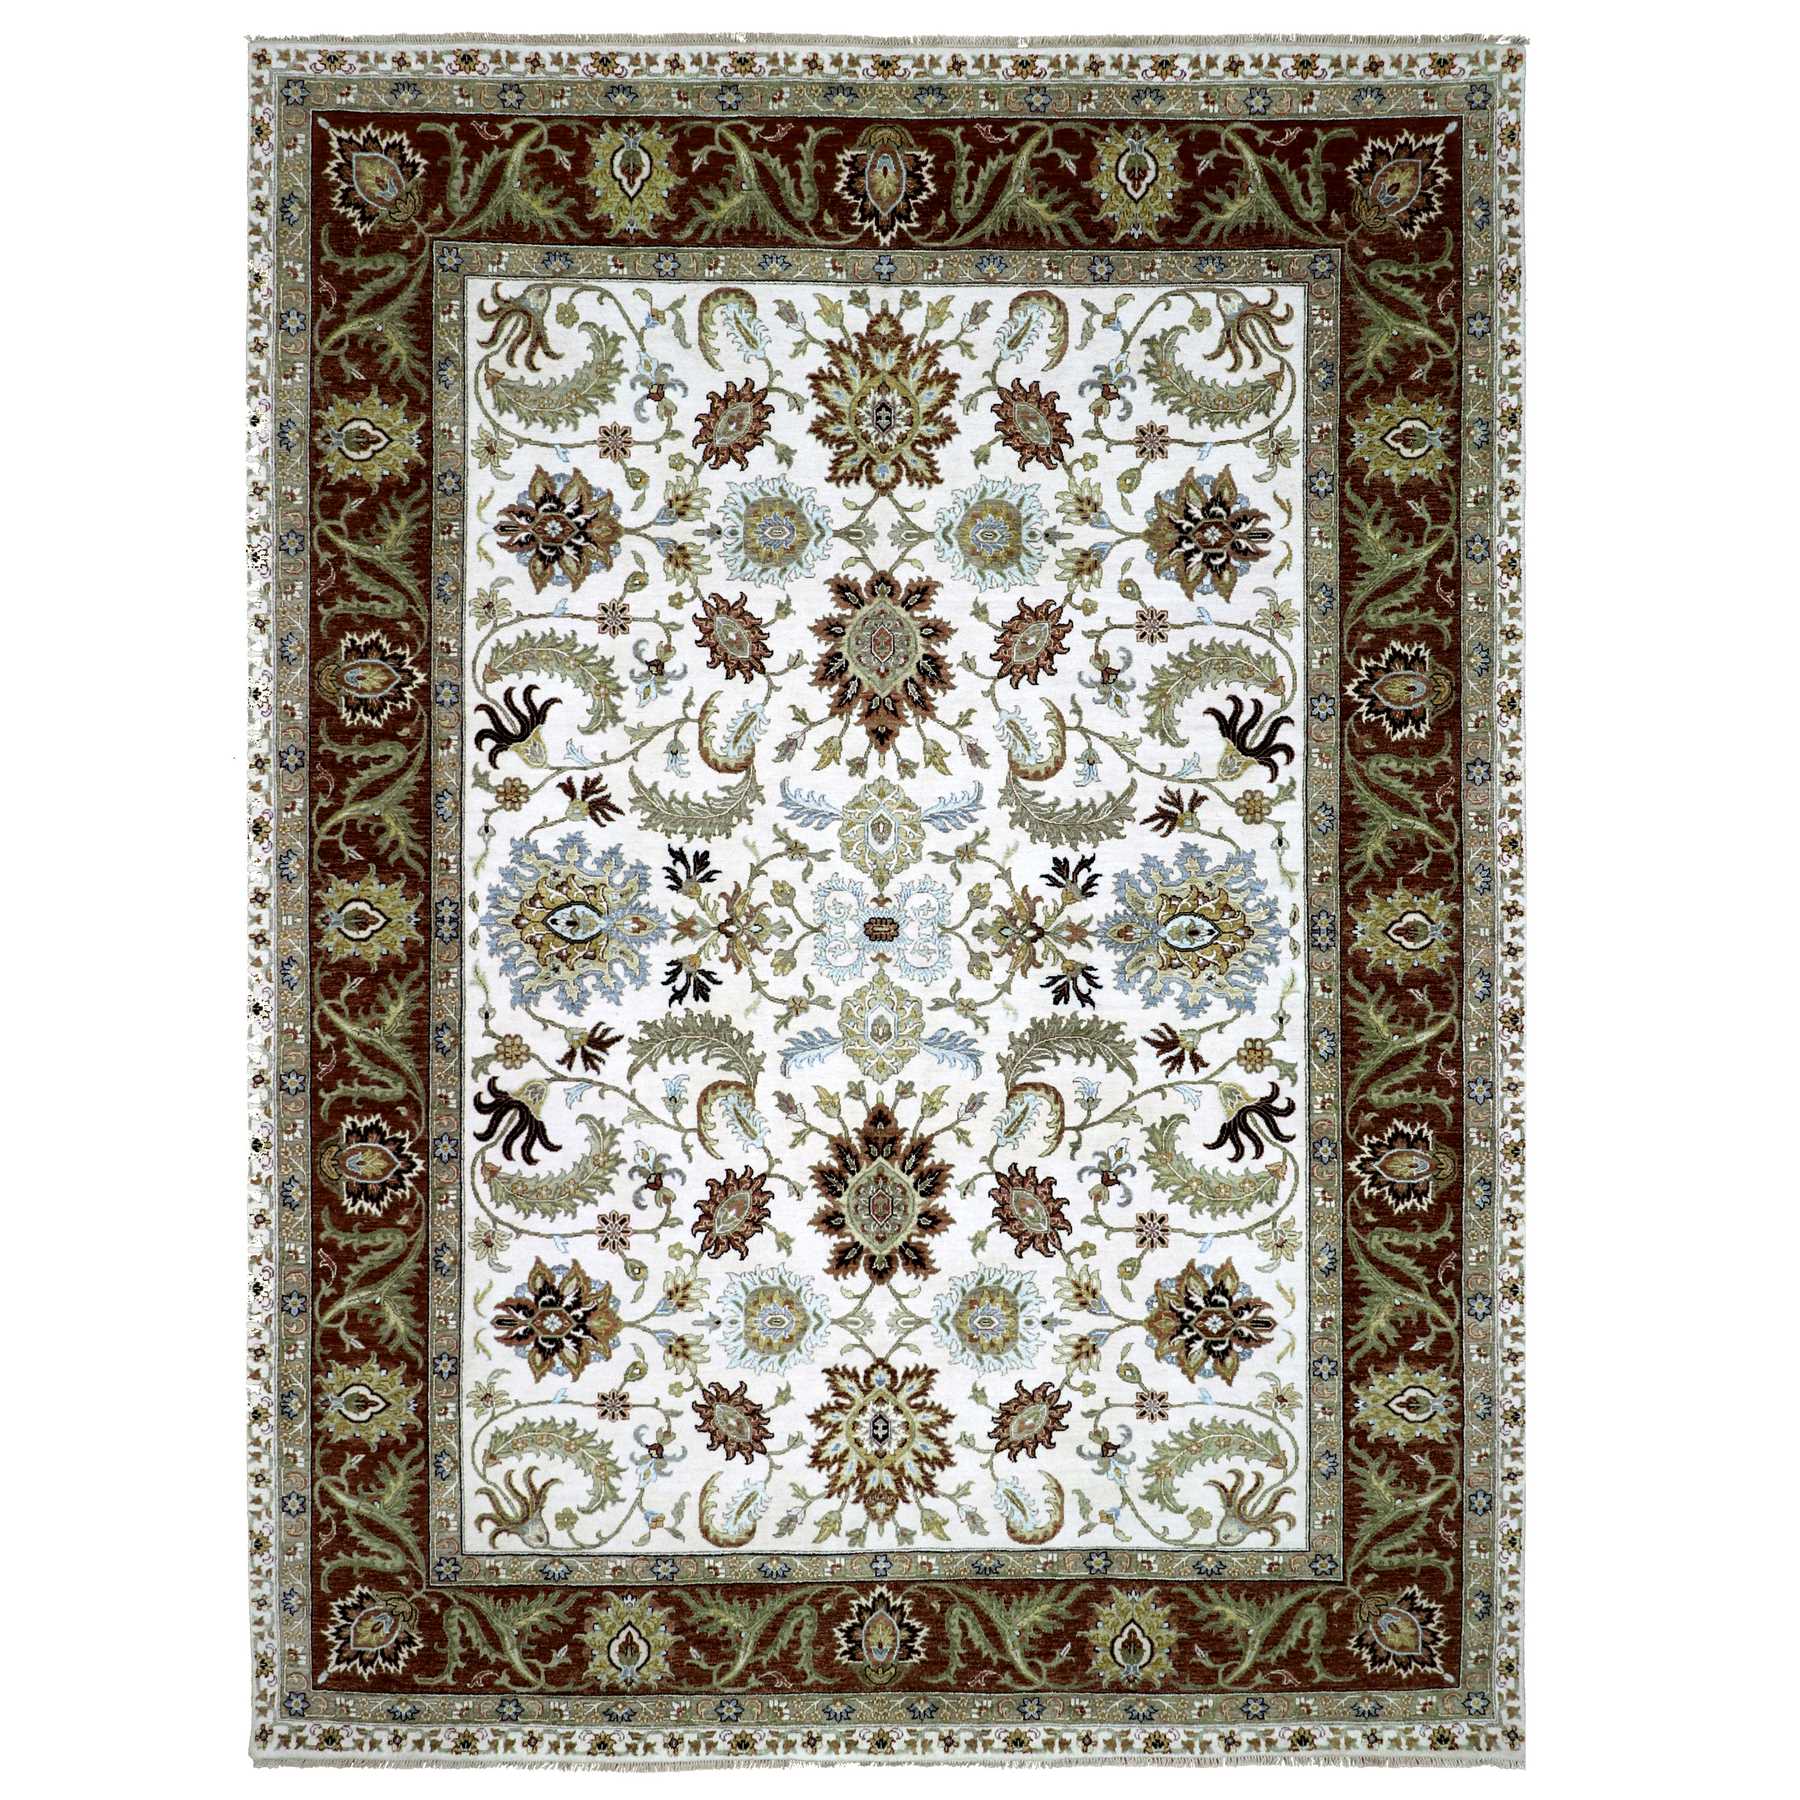 Oxford White and Auburn Red Border, Agra Scroll and Large Leaf Design Hand Knotted 100% Wool, Oriental Rug